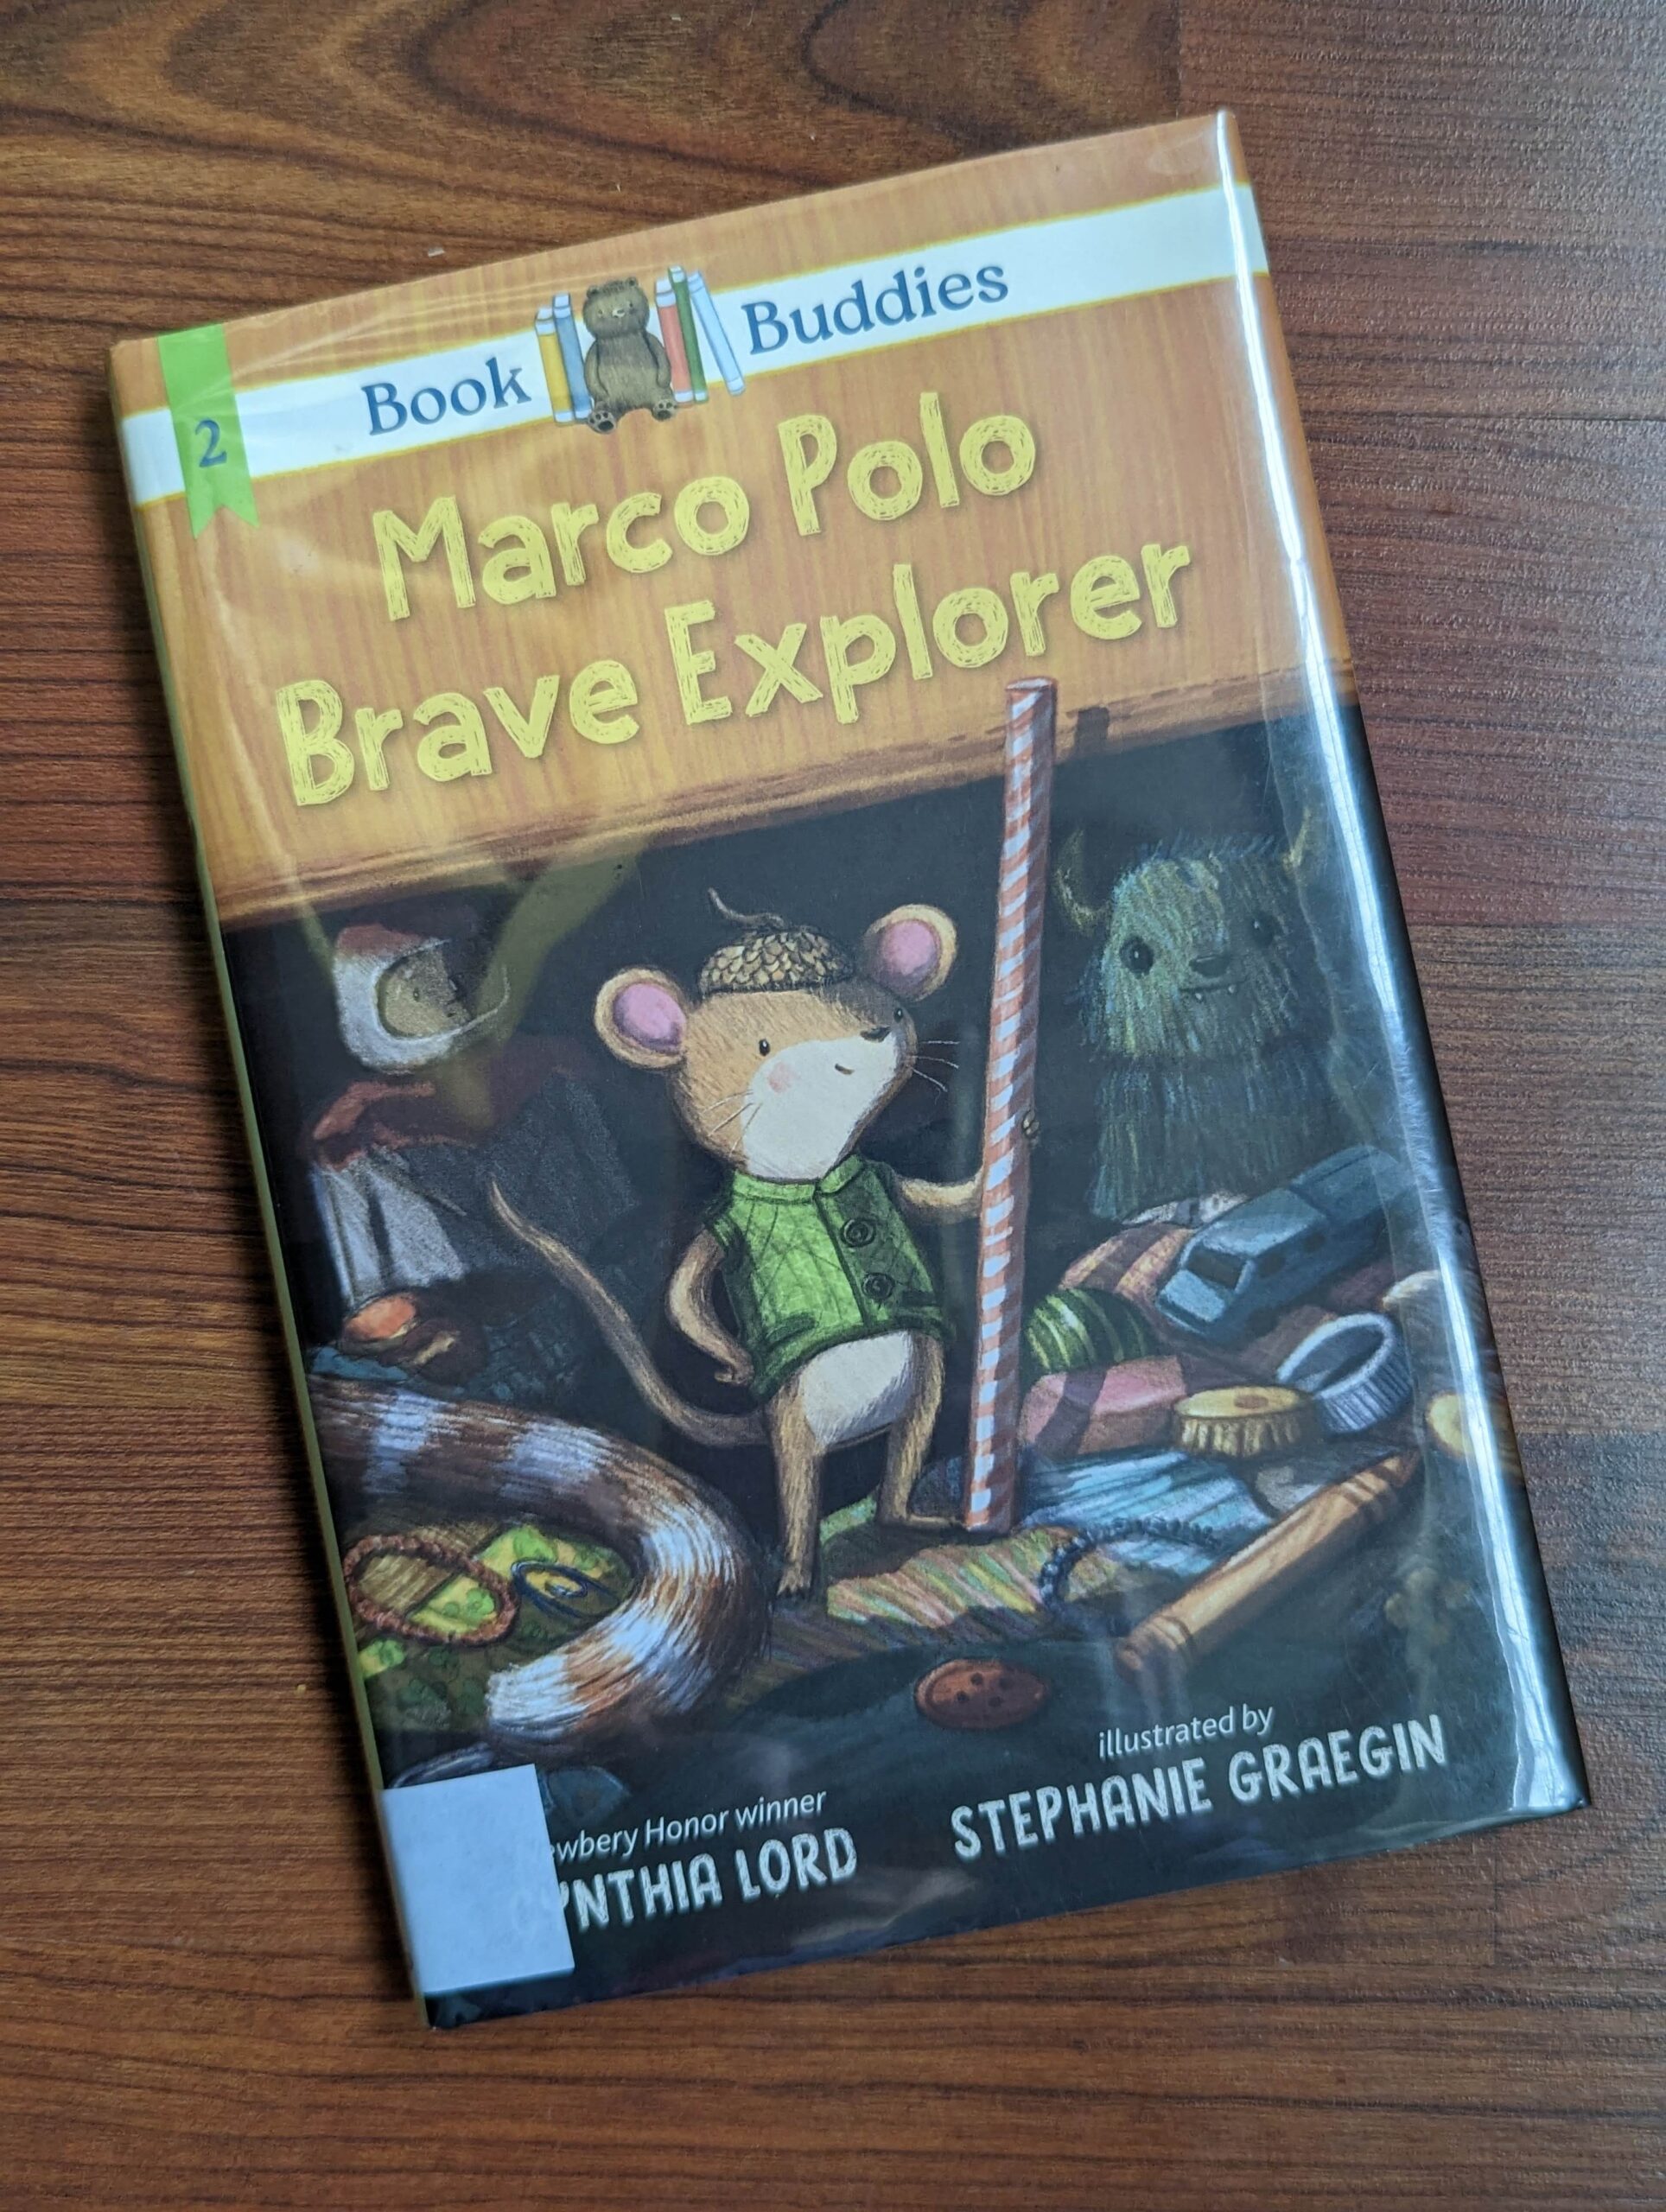 The chapter book Marco Polo Brave Explorer by Cynthia Lord and illustrated by Stephanie Graegin. Book #2 in the Book Buddies Series